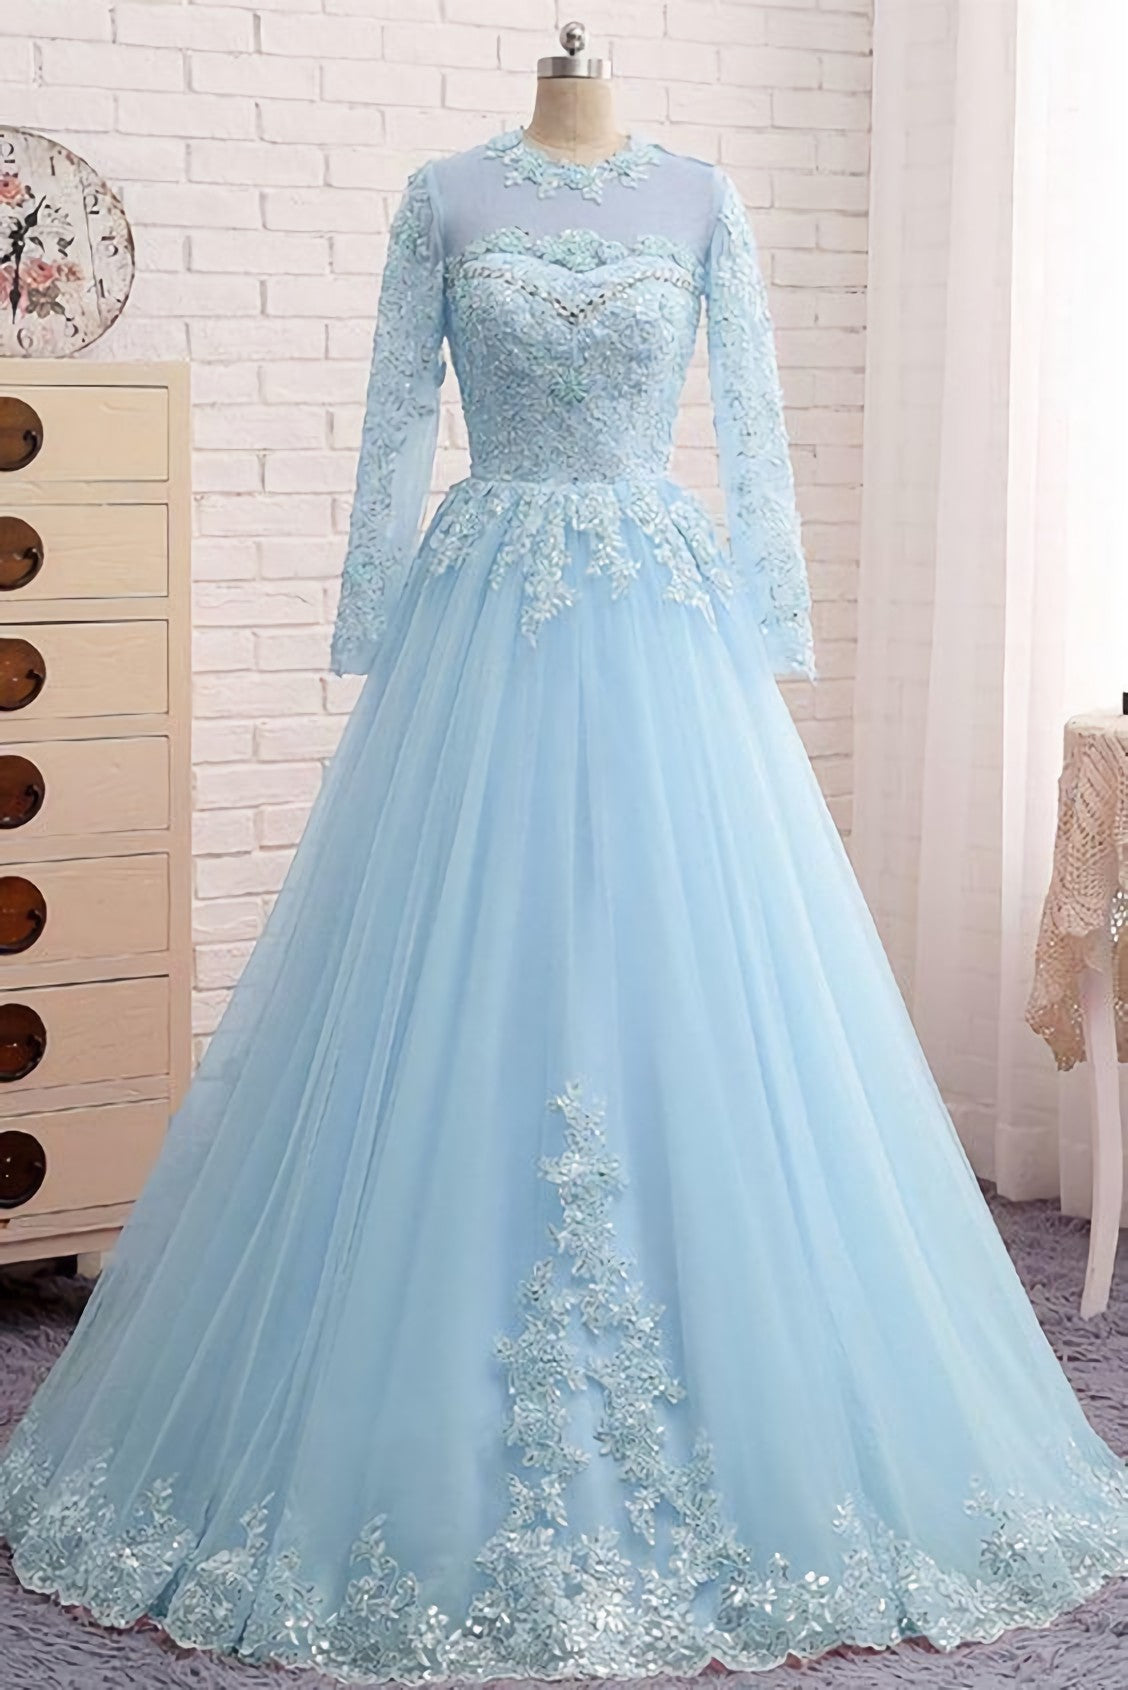 Blue Lace Tulle Long Sleeve Beaded Formal Prom Dress